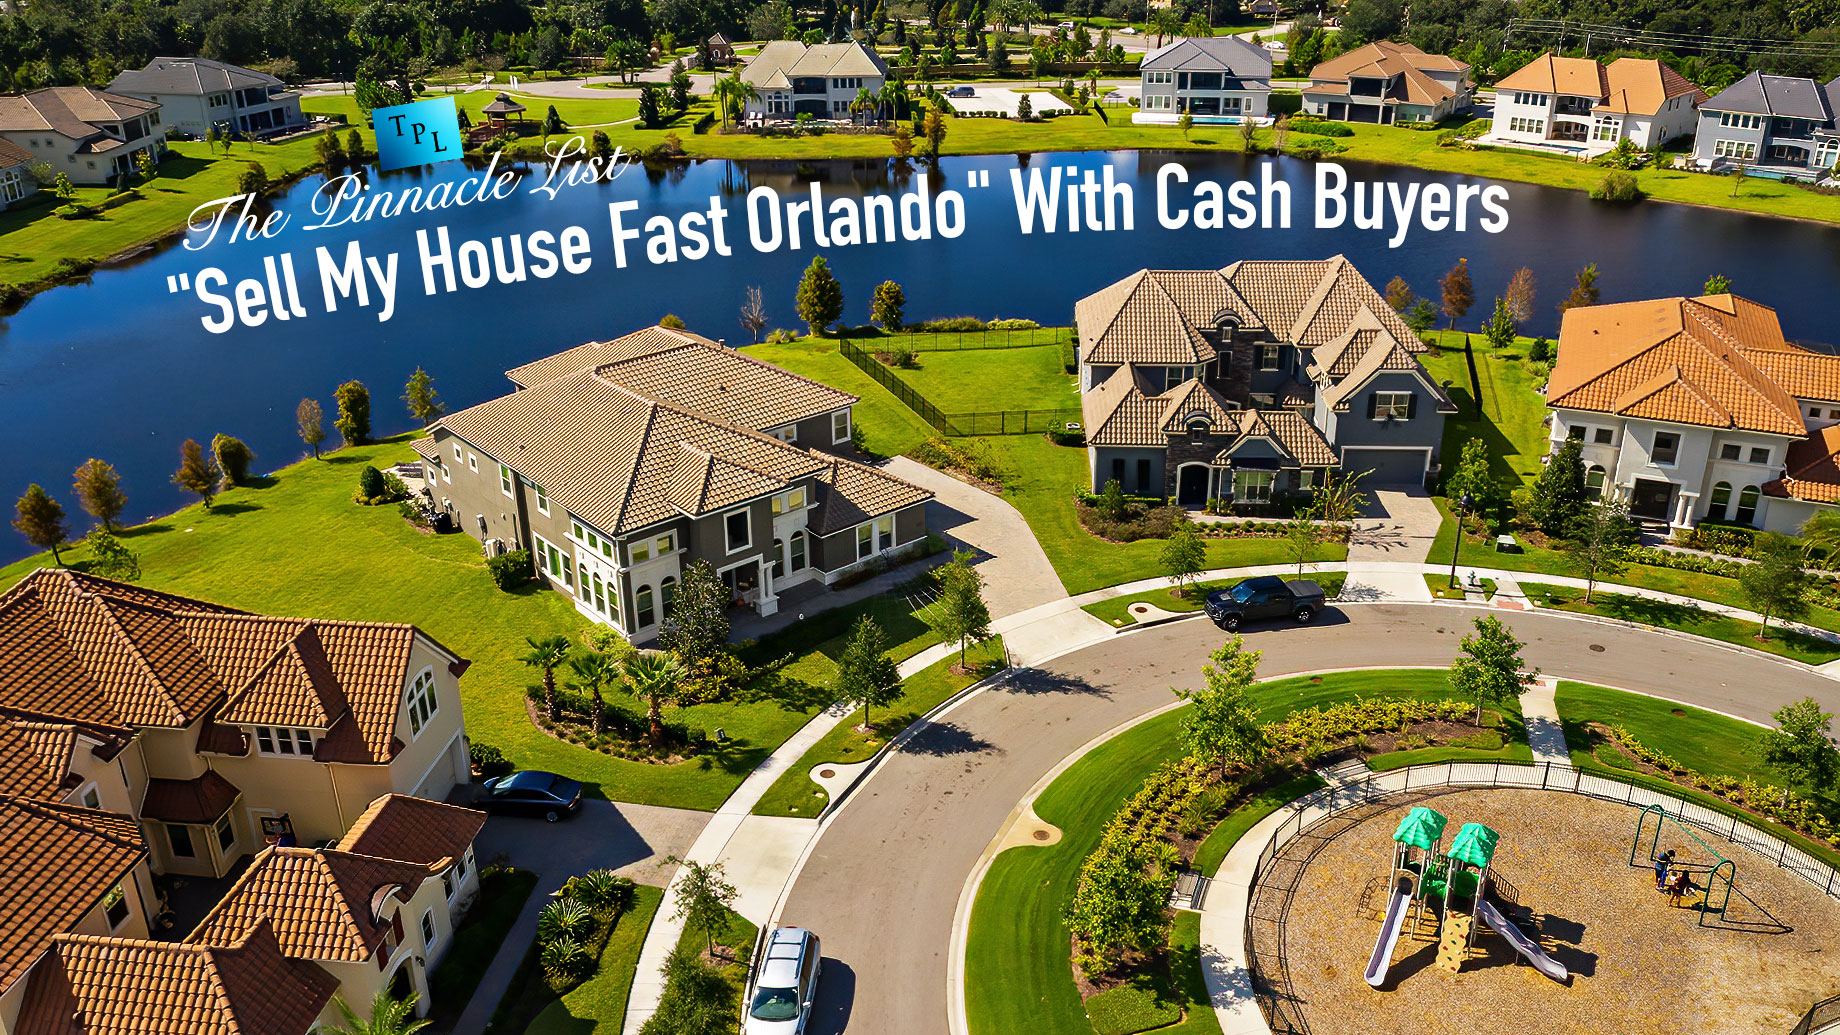 "Sell My House Fast Orlando" With Cash Buyers